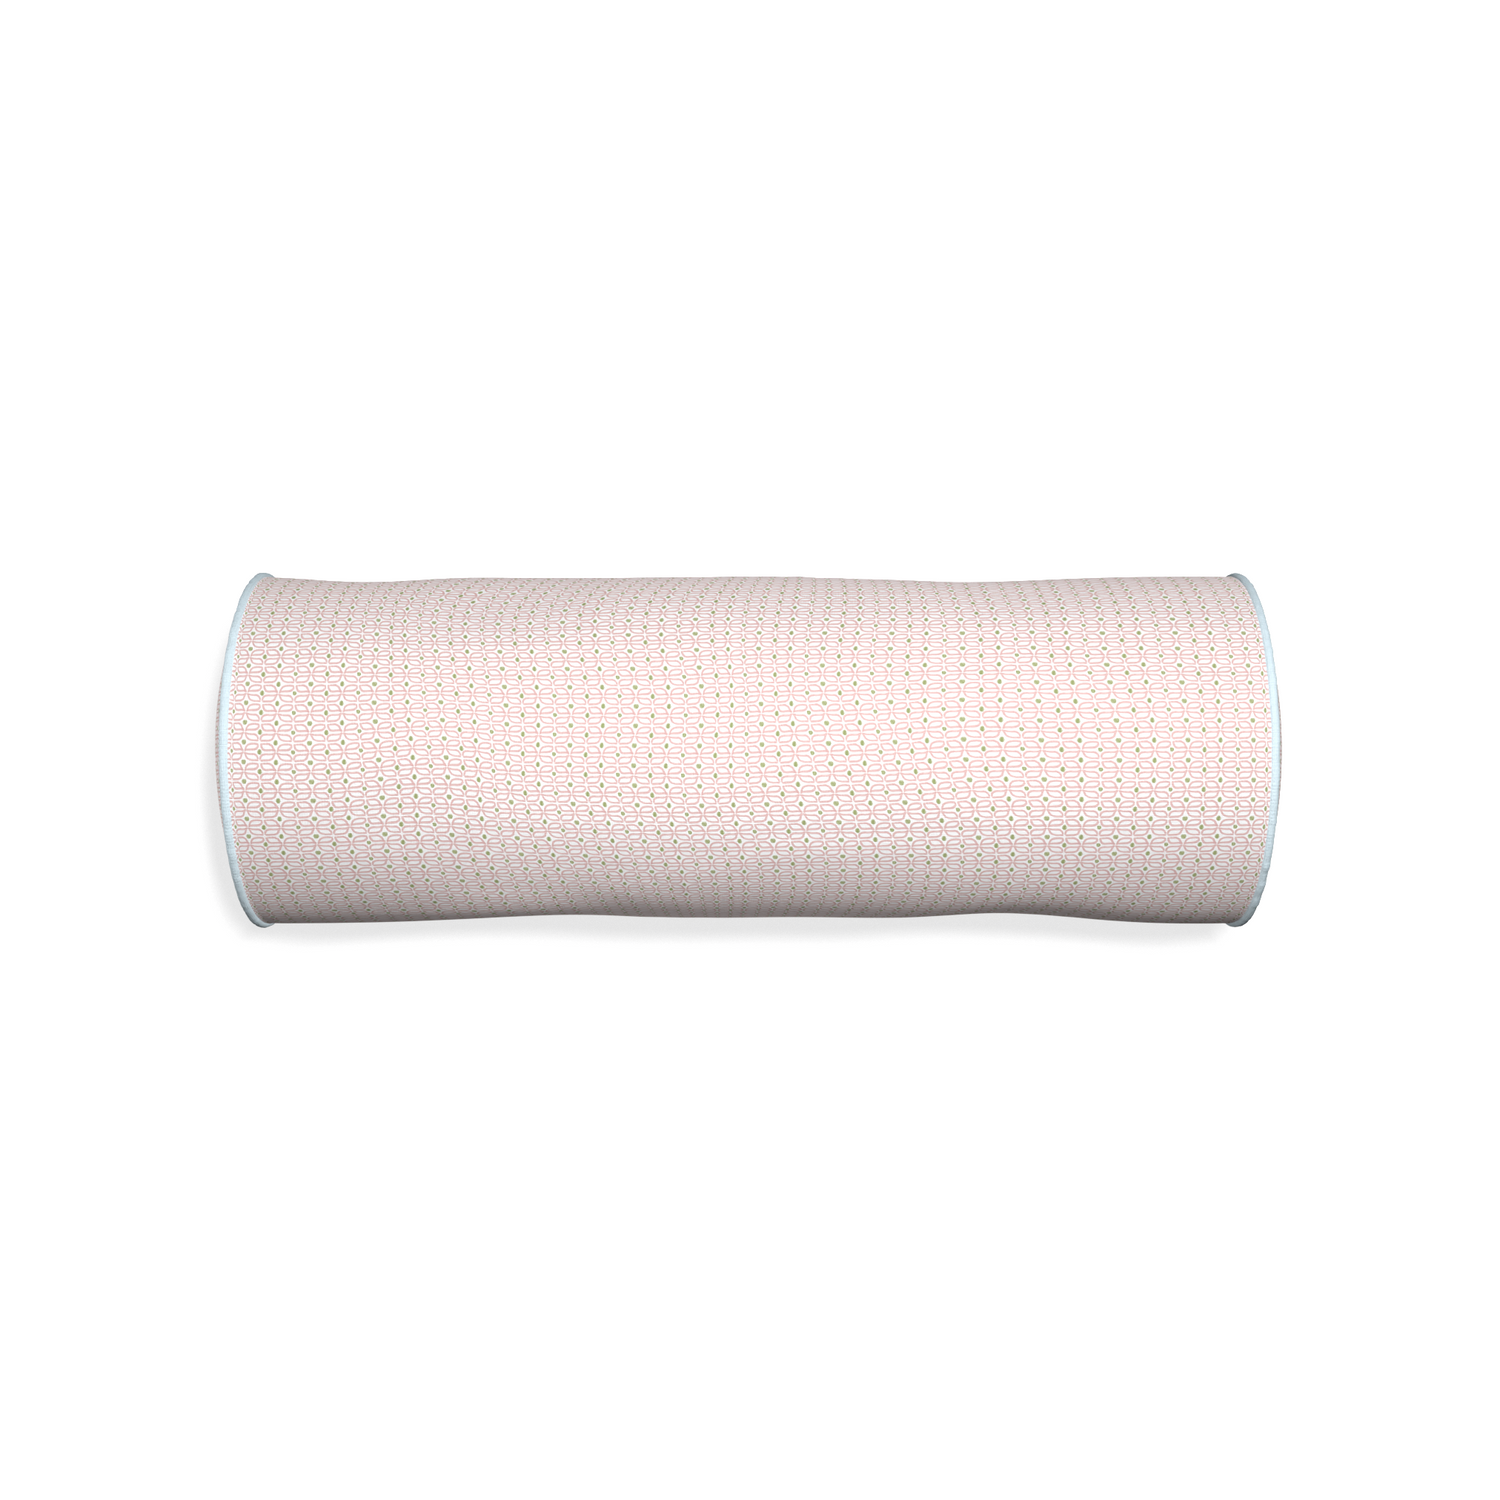 Bolster loomi pink custom pink geometricpillow with powder piping on white background